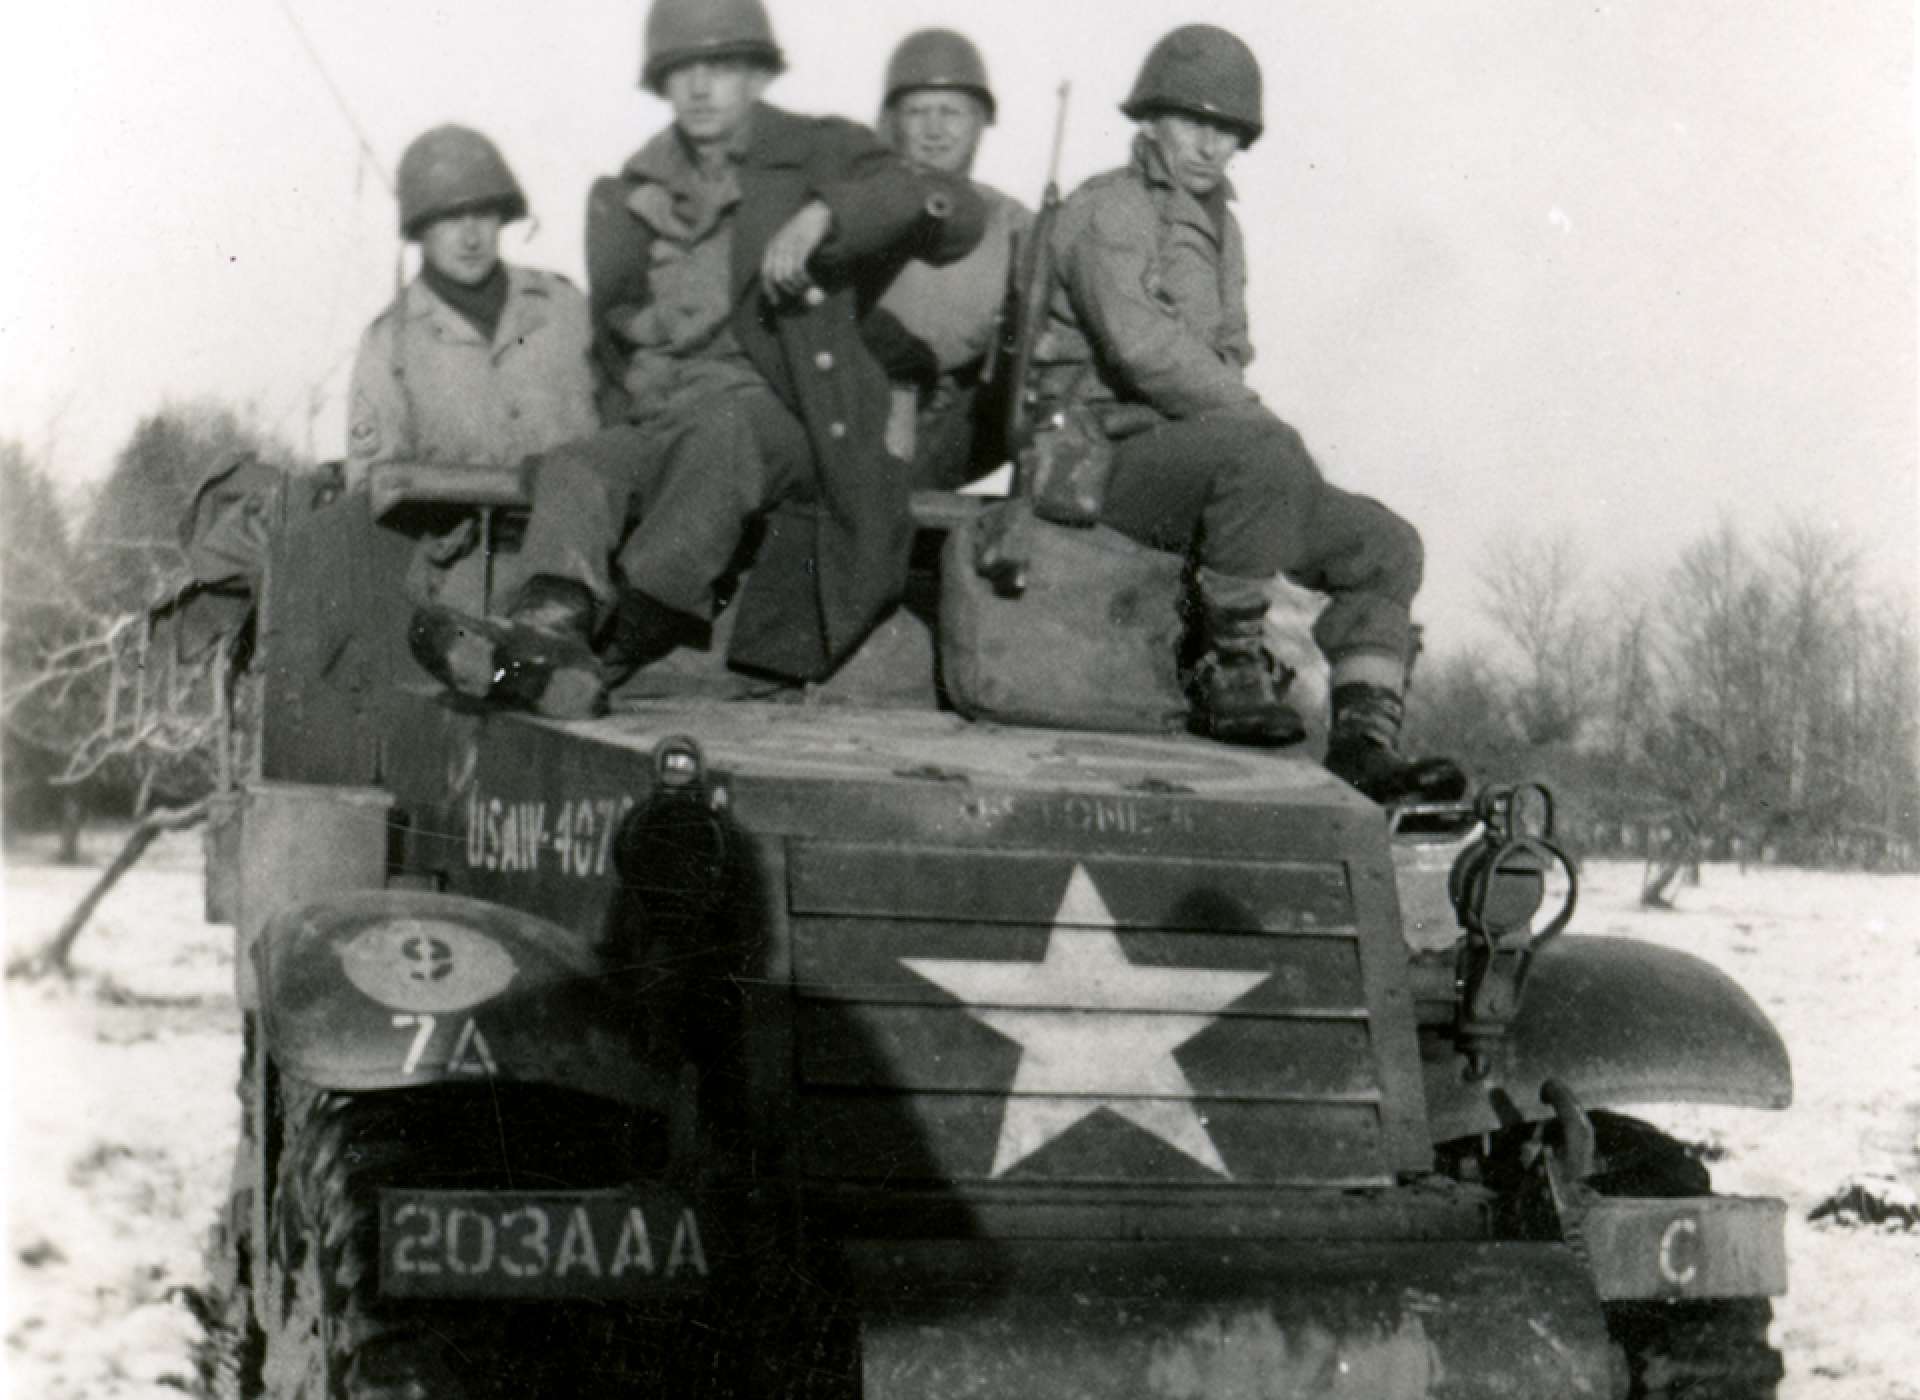 Four American soldiers riding on a half-track during the Battle of the Bulge